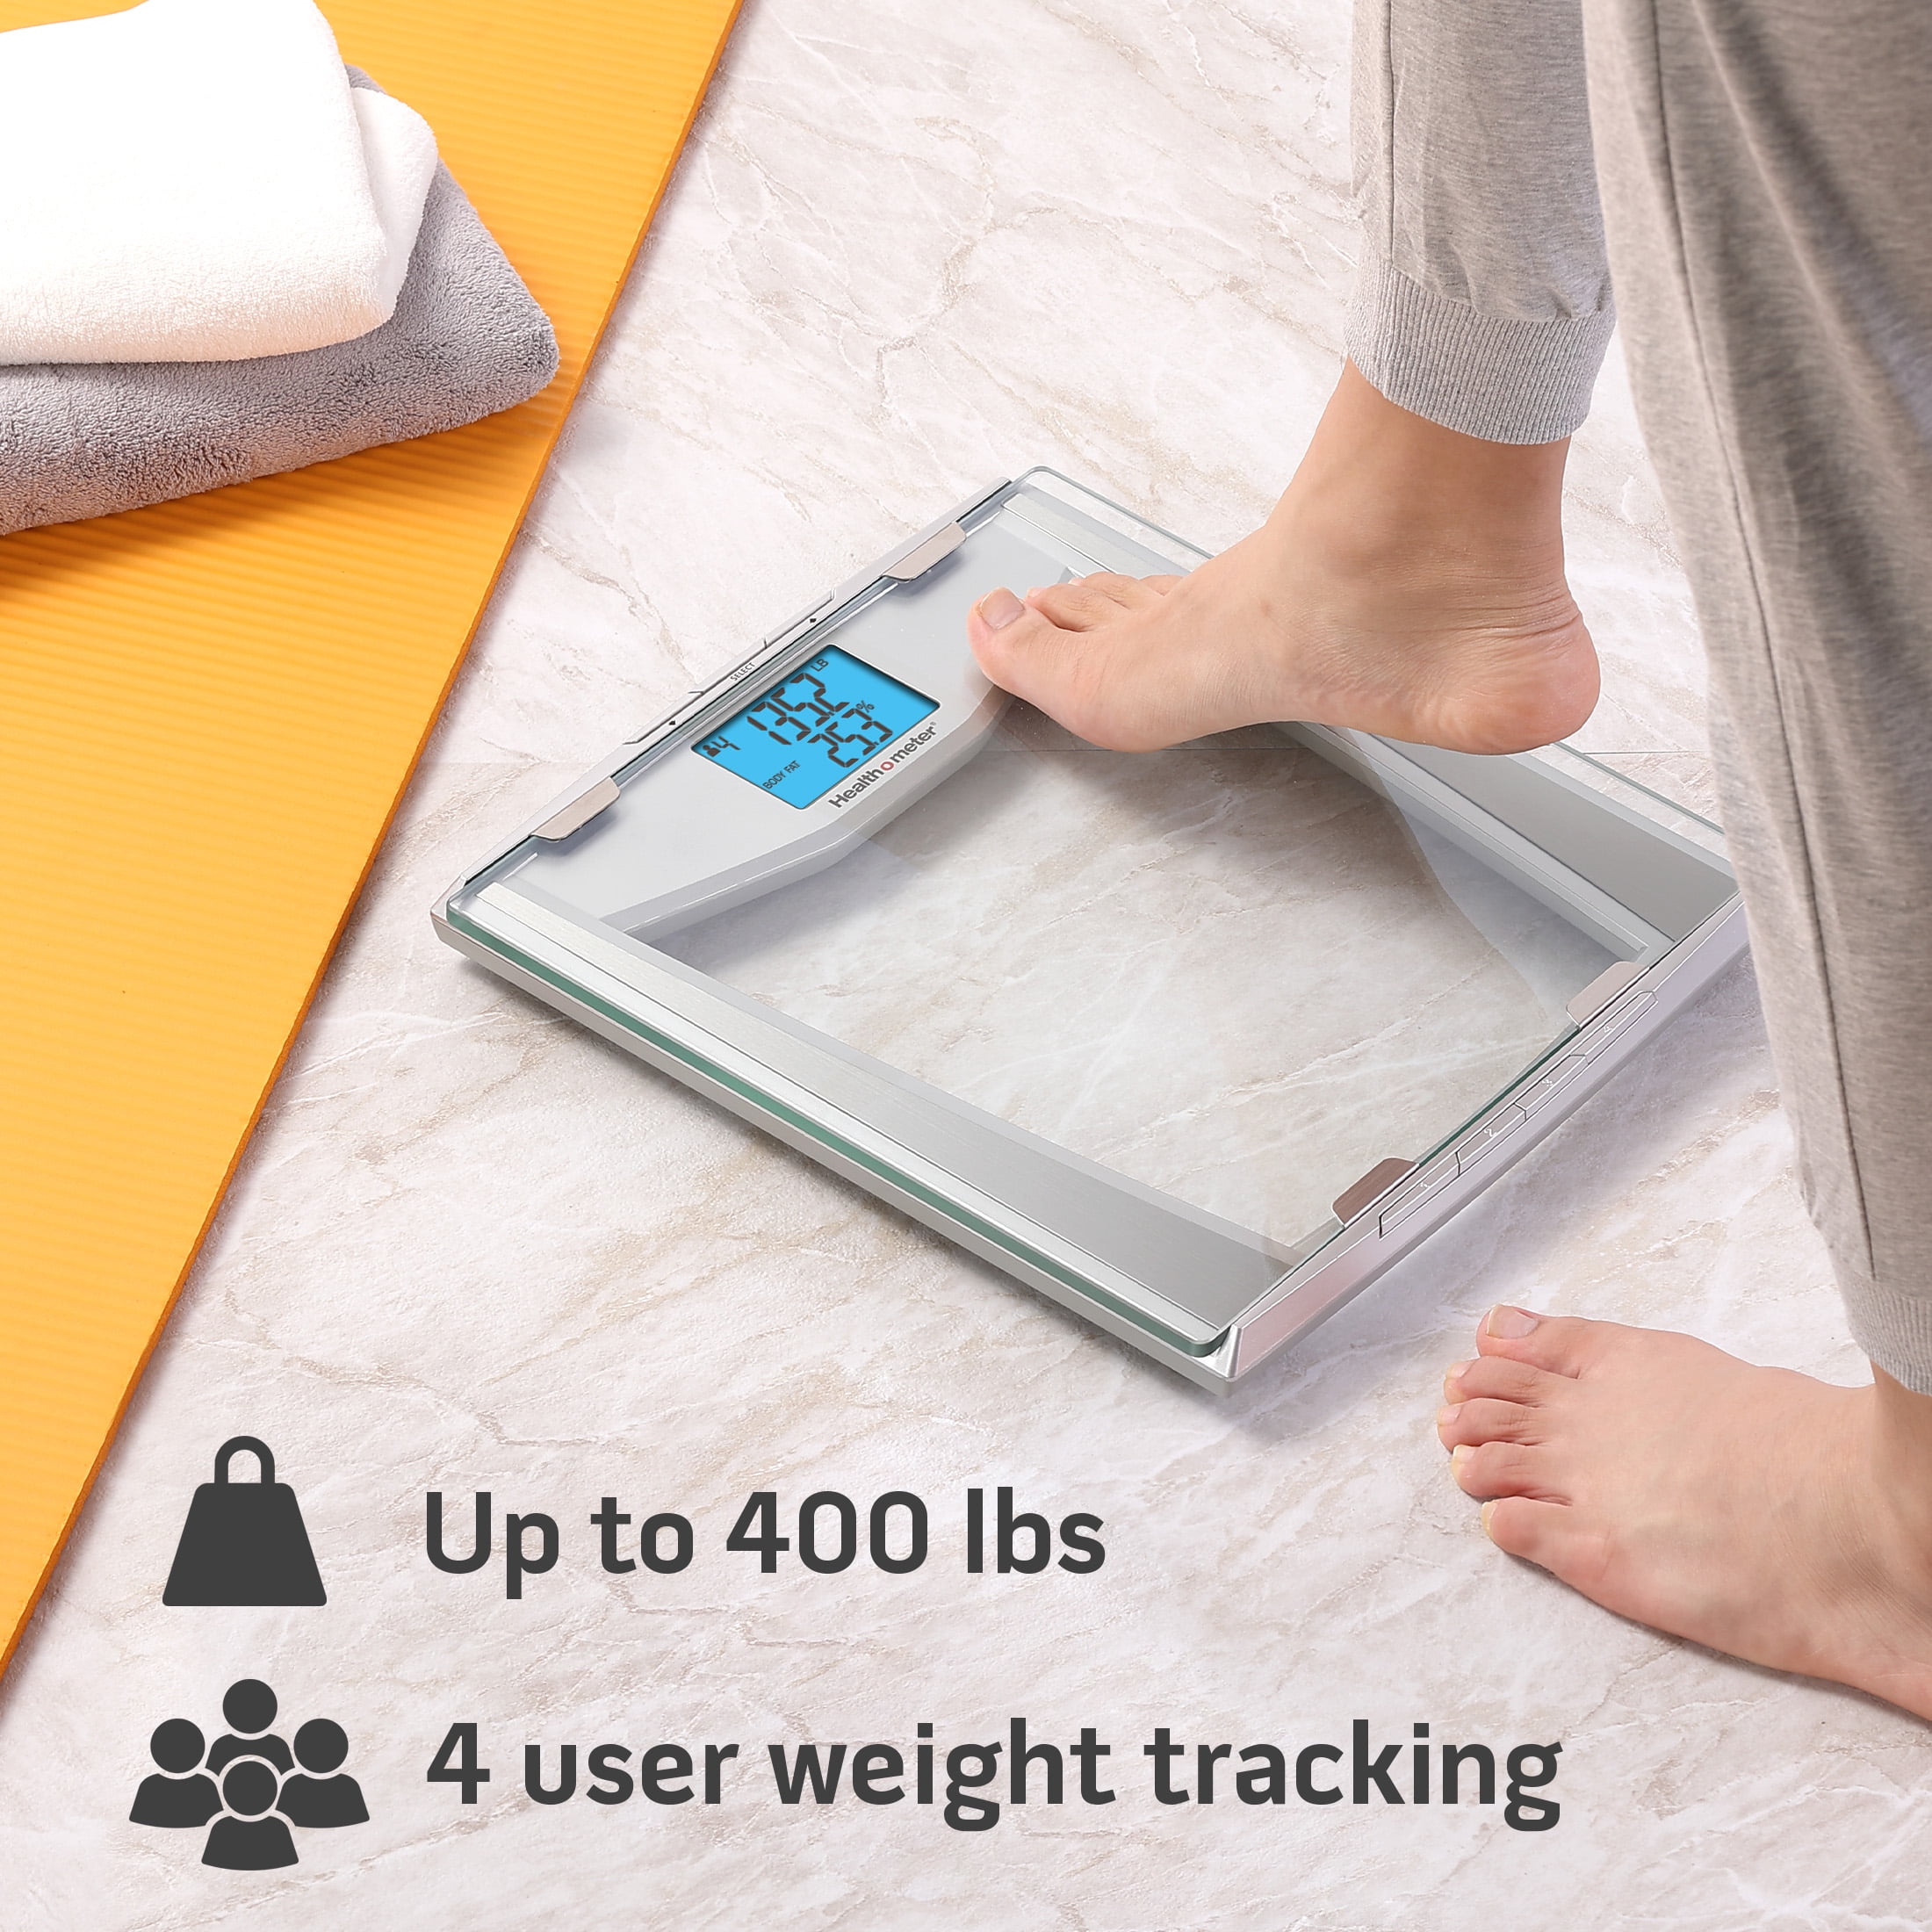 Moon Knight Optima Home Scales CN-400 Contour Bathroom Body Weight Scale;  Black CN-400